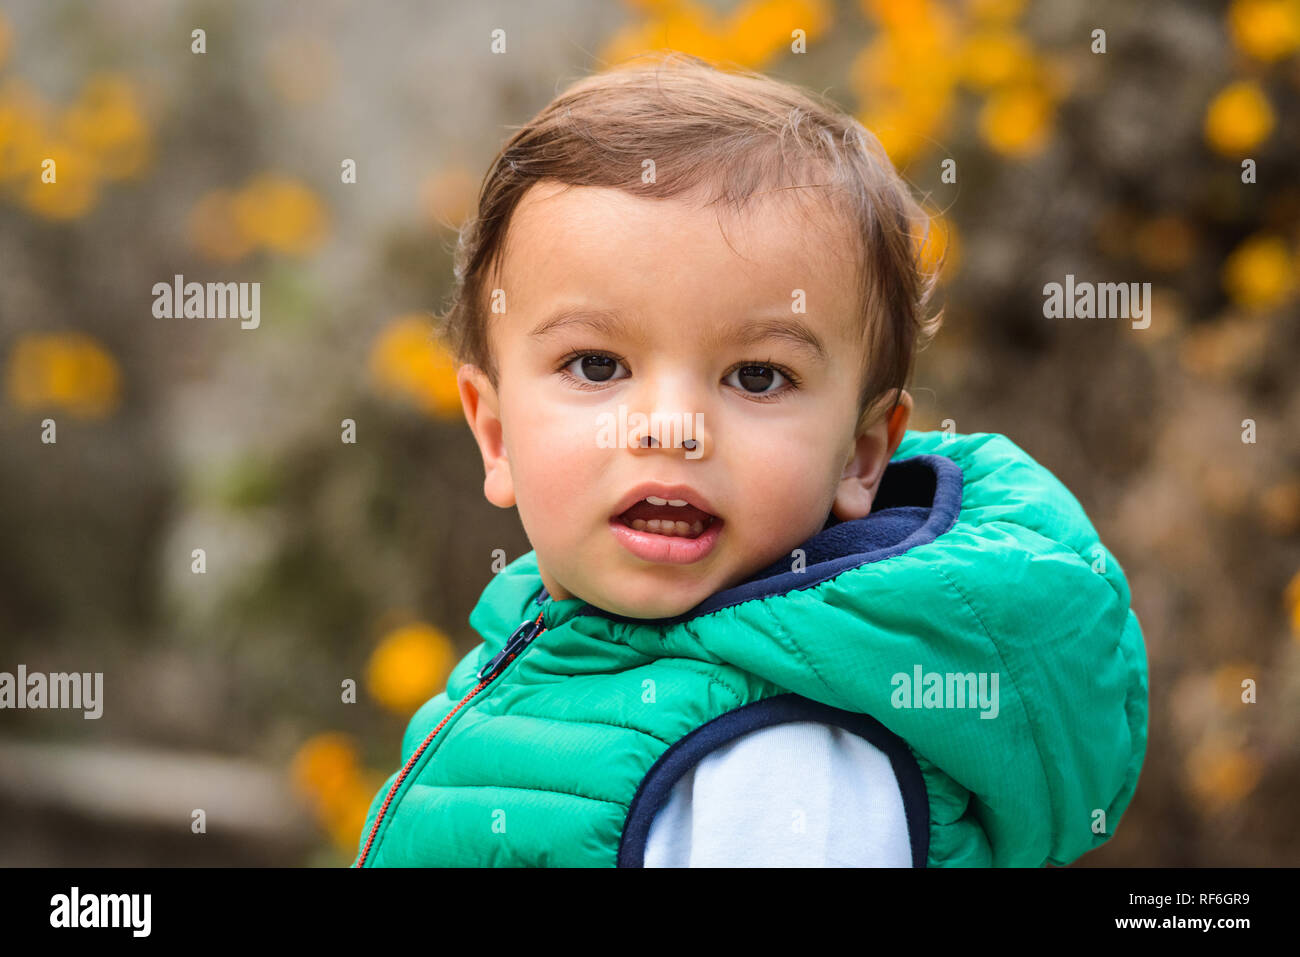 Outdoor portrait of mixed raced toddler in a garden, out of focus marigold flowers in the background. Stock Photo